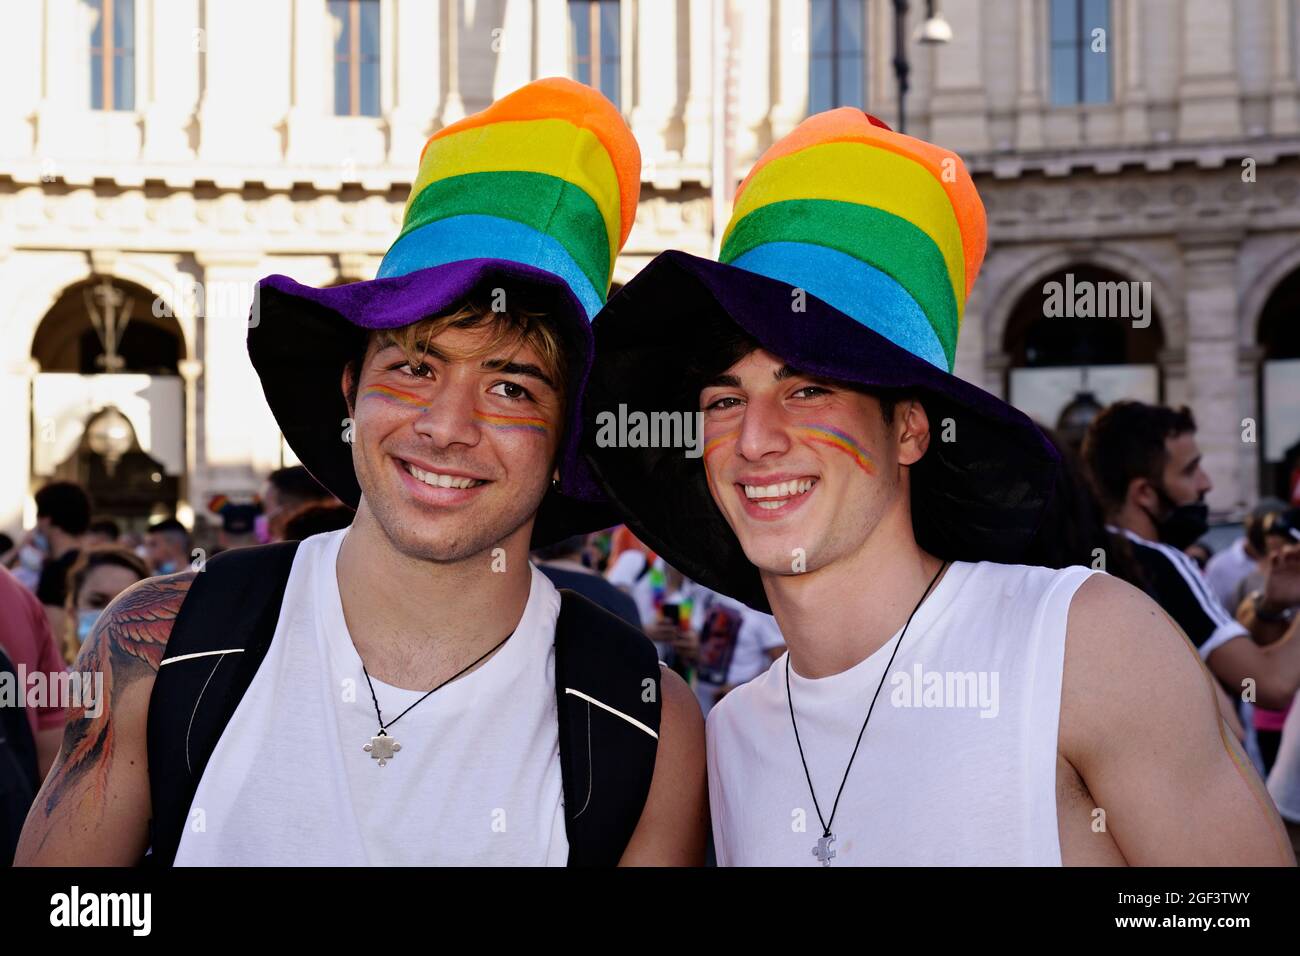 Smiling gay male couple wearing a hat. Gay Pride Parade. LGBT community. Rome, Italy Stock Photo